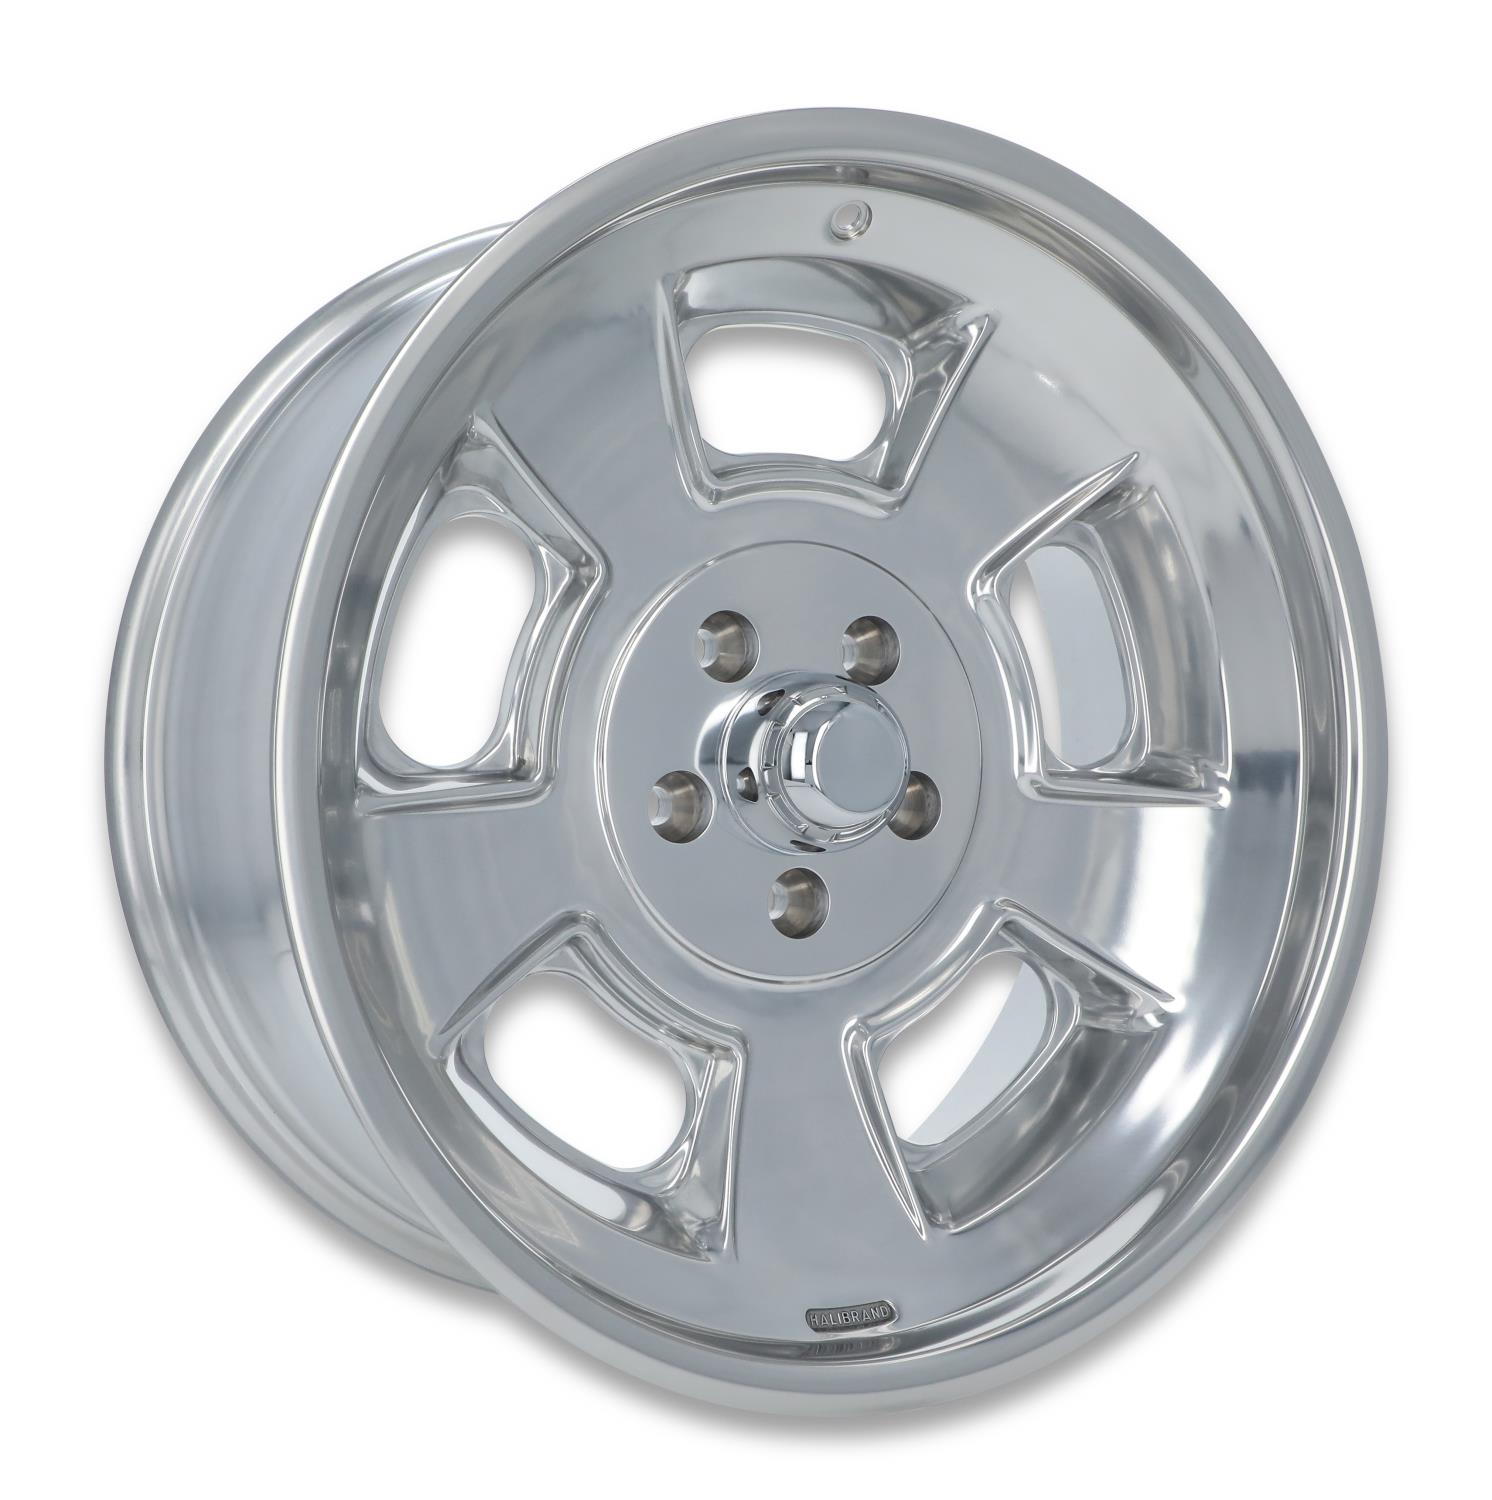 Sprint Front Wheel, Size: 20x8.5", Bolt Pattern: 5x5", Backspace: 4.5" [Polished - Gloss Clearcoat]